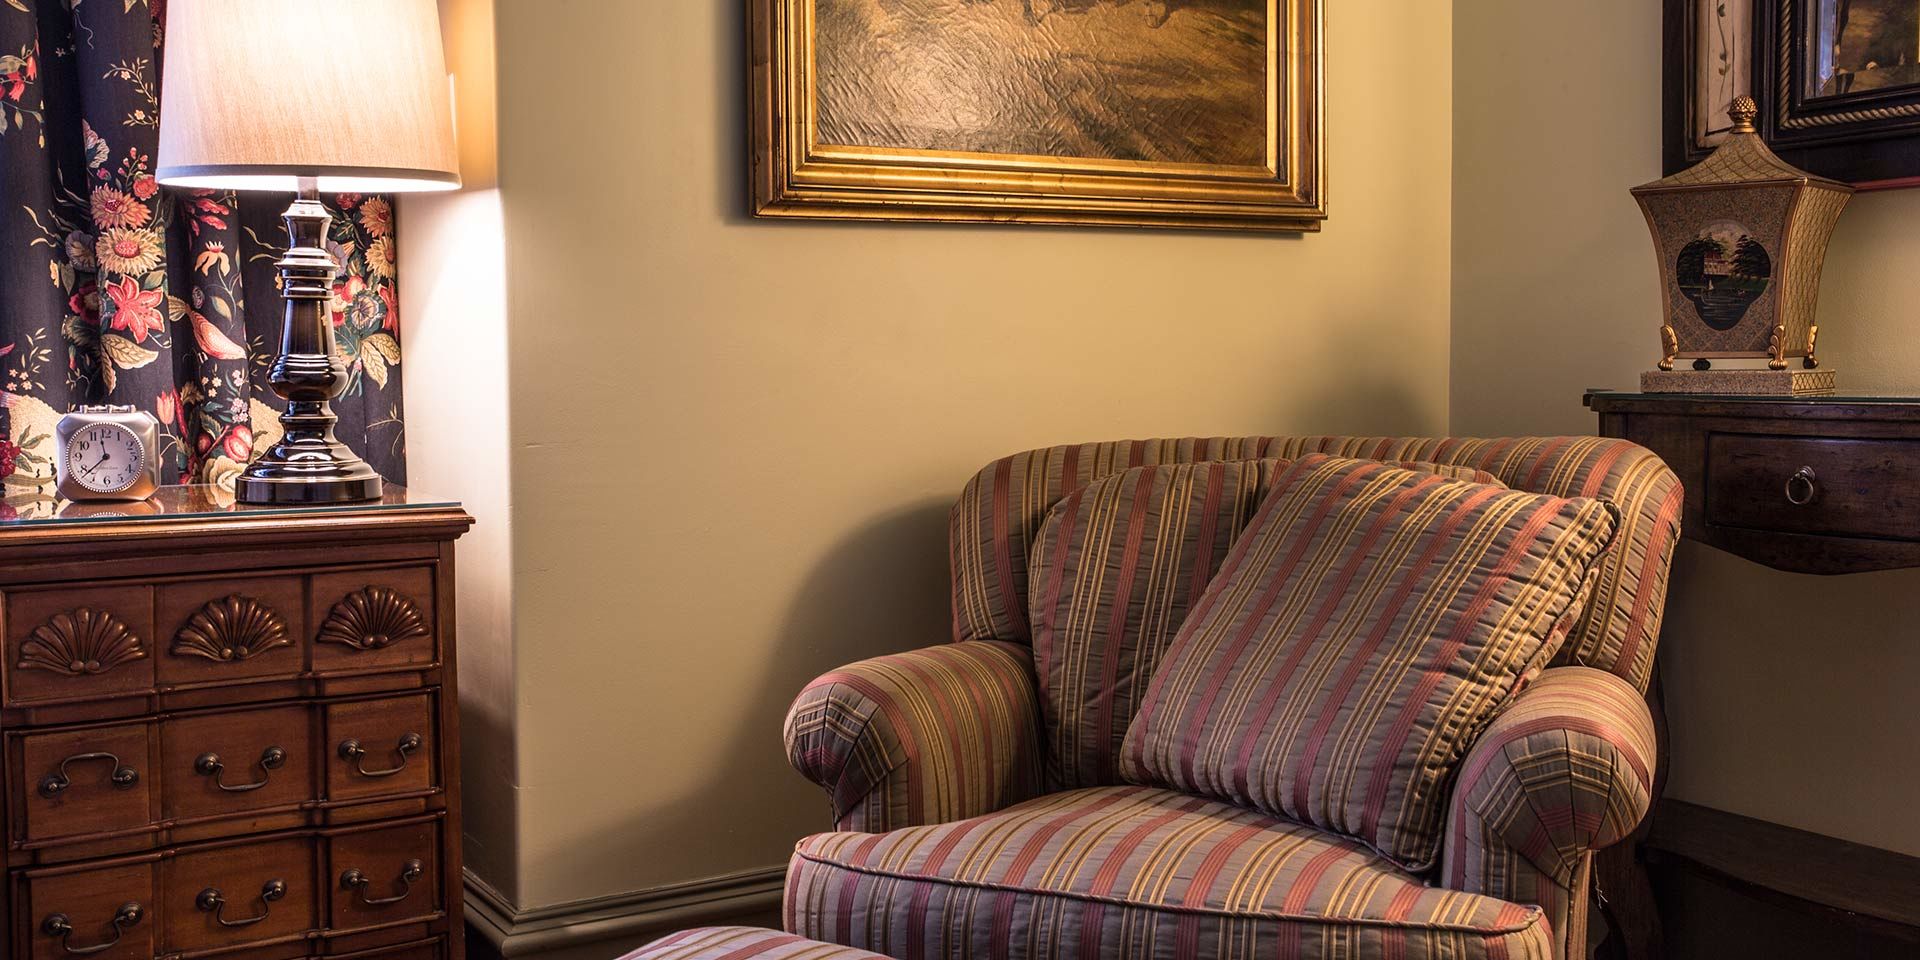 Relax inside the Colonial Guest Room with characteristic décor of a traditional colonial home